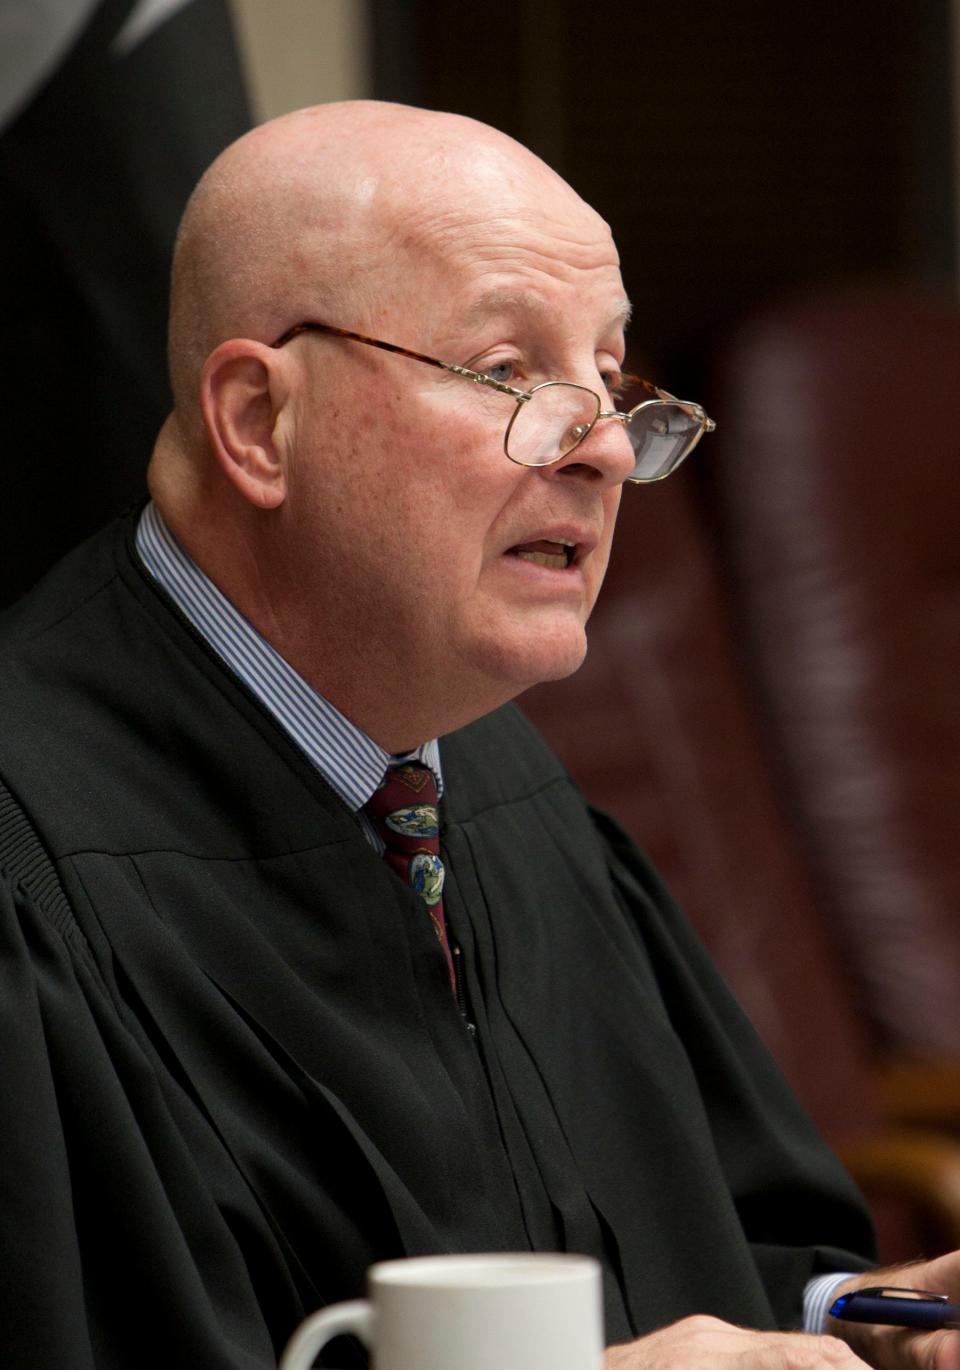 Judge Robert LePore as seen in a 2013 file photo.